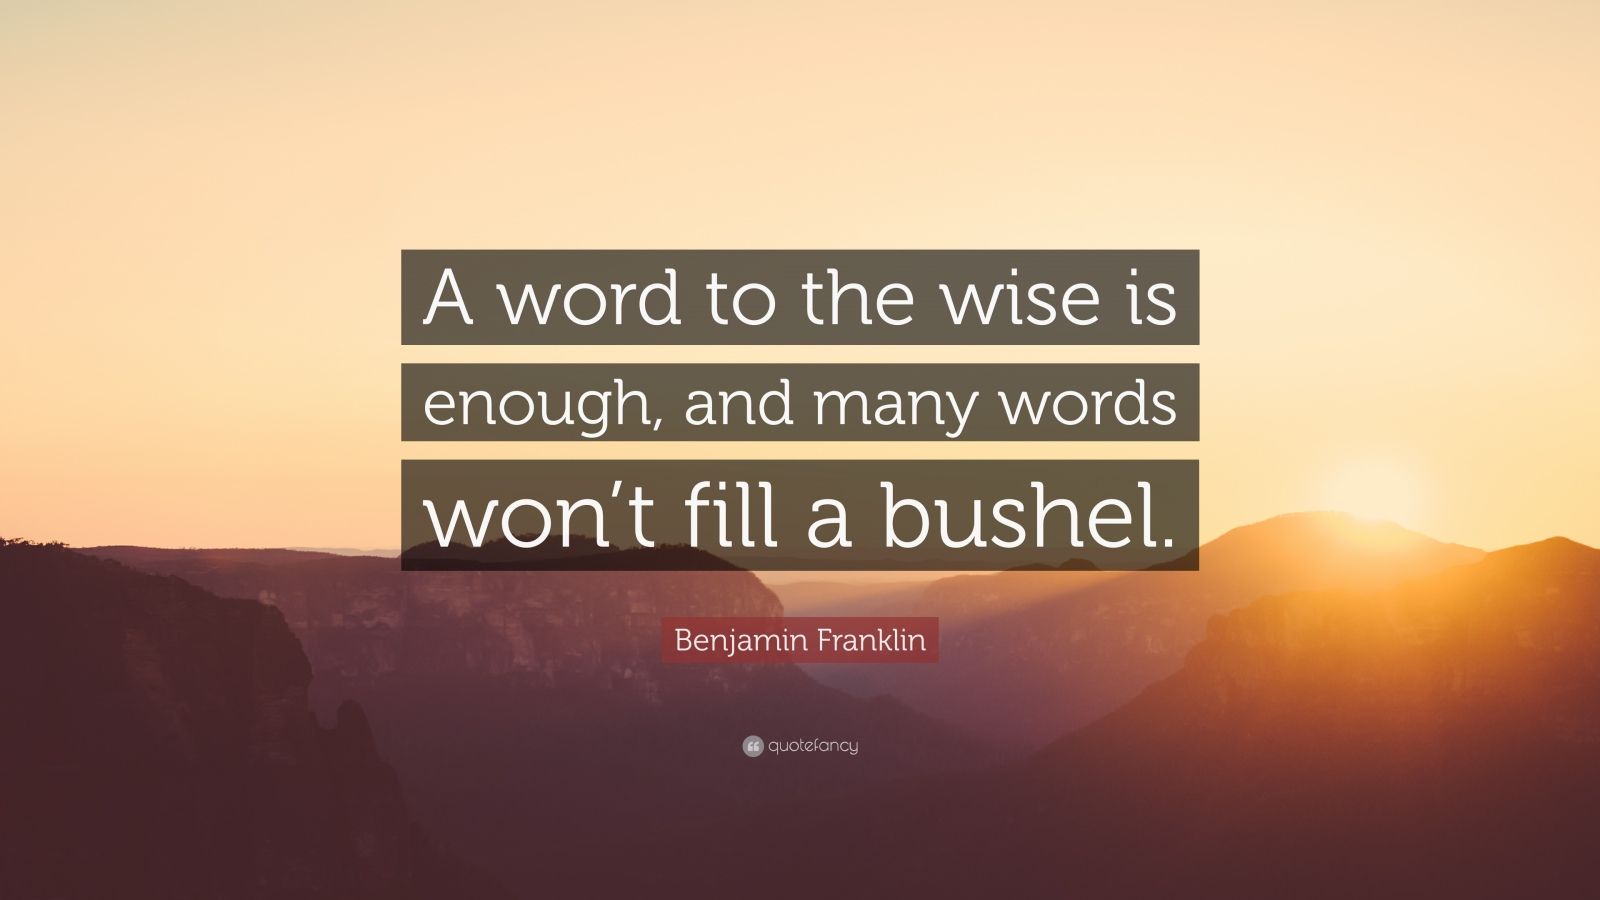 https://quotefancy.com/media/wallpaper/1600x900/446747-Benjamin-Franklin-Quote-A-word-to-the-wise-is-enough-and-many.jpg